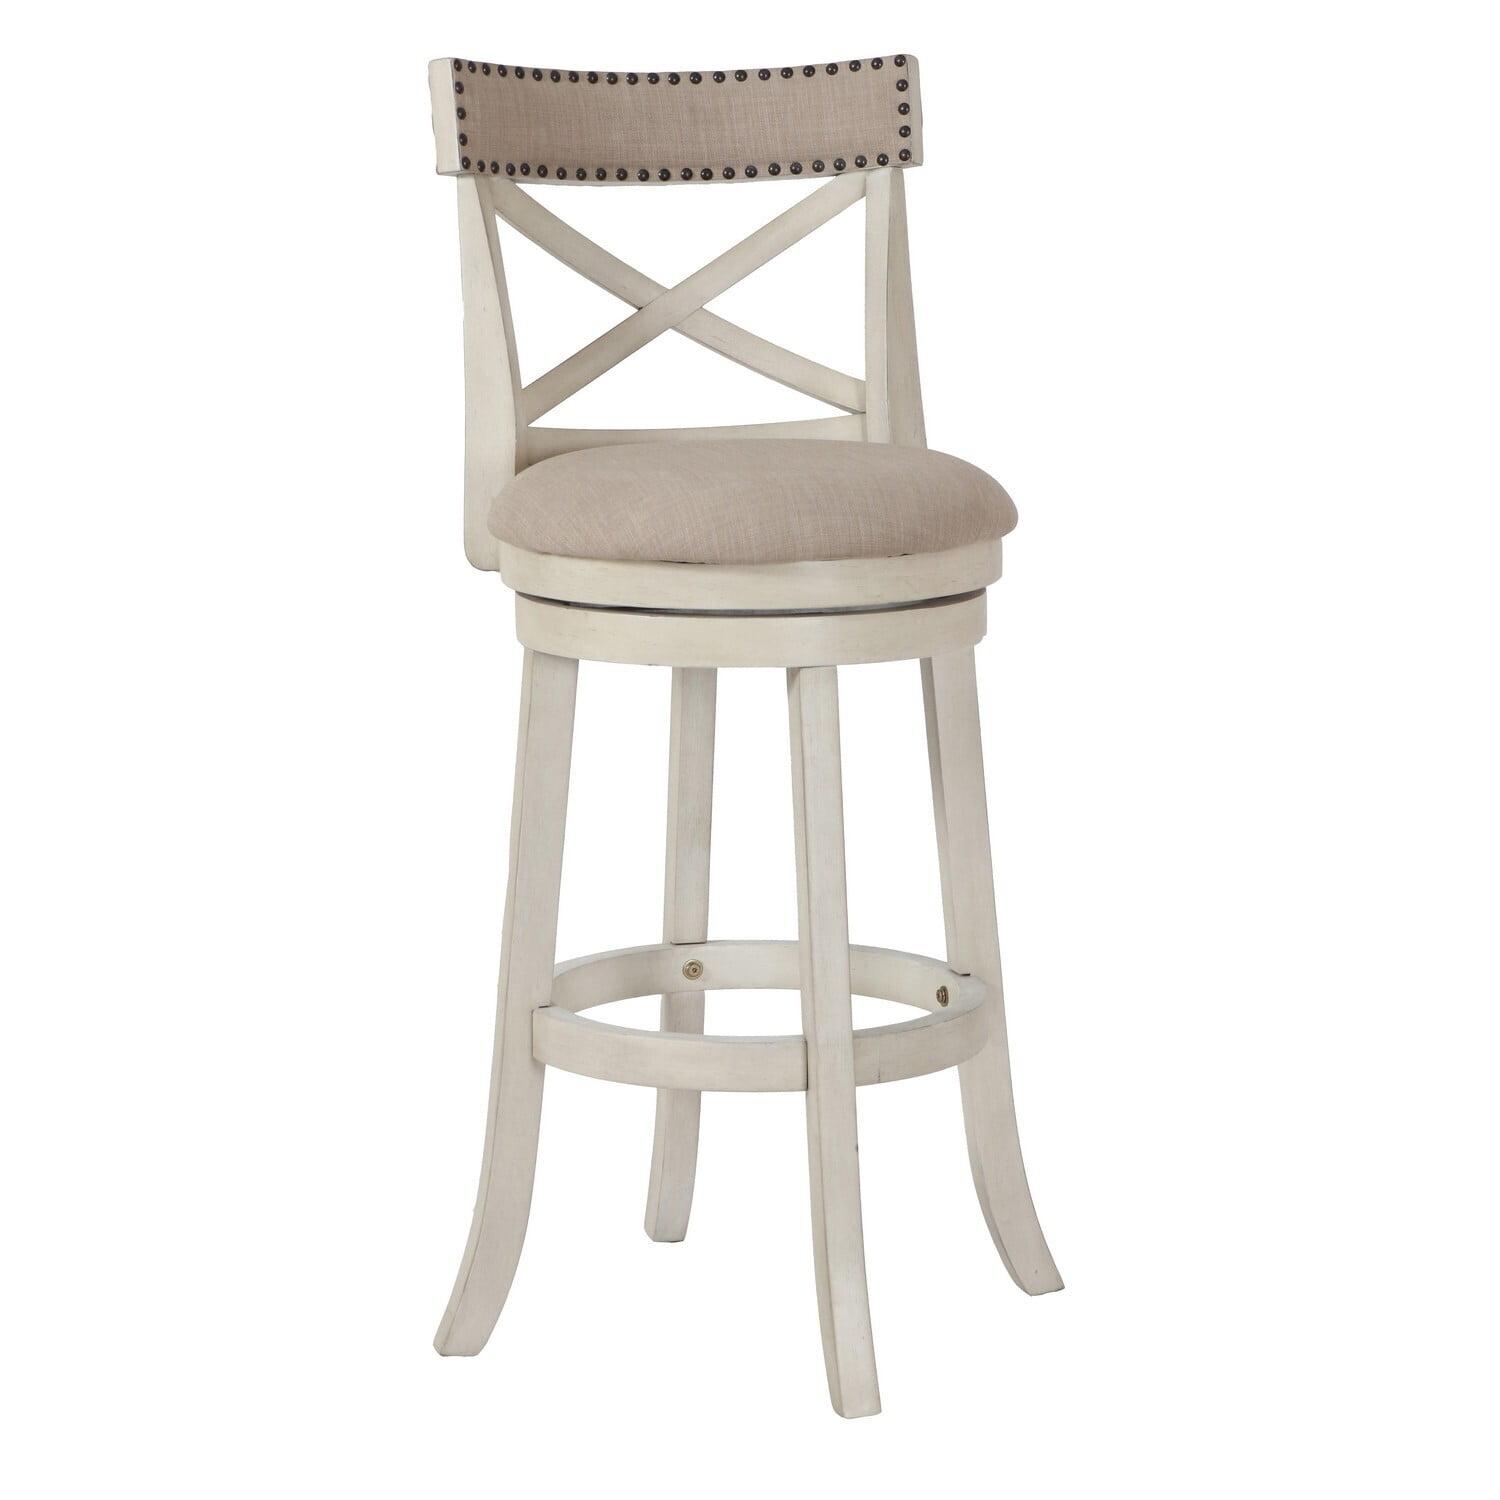 Classic White Swivel Barstool with Curved X-Back and Padded Seat